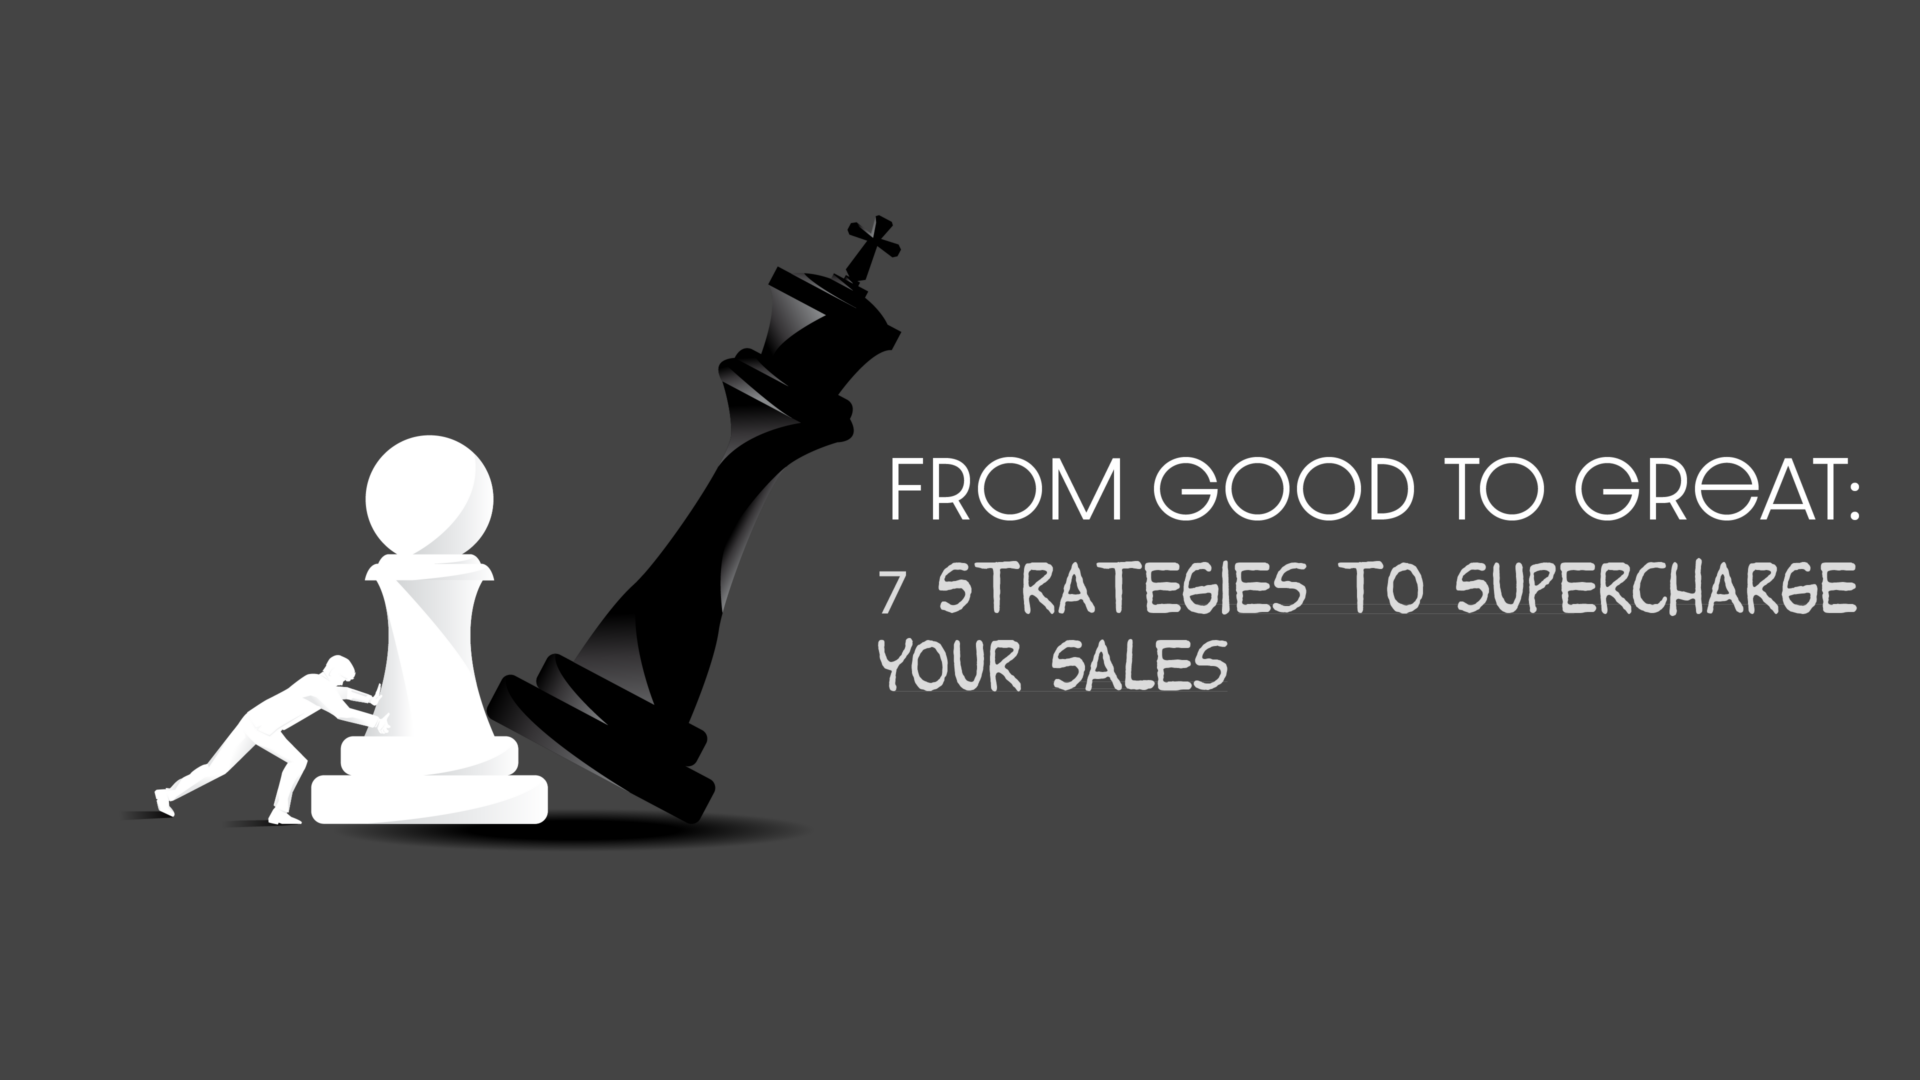 From Good to Great: 7 Strategies to Supercharge Your Sales